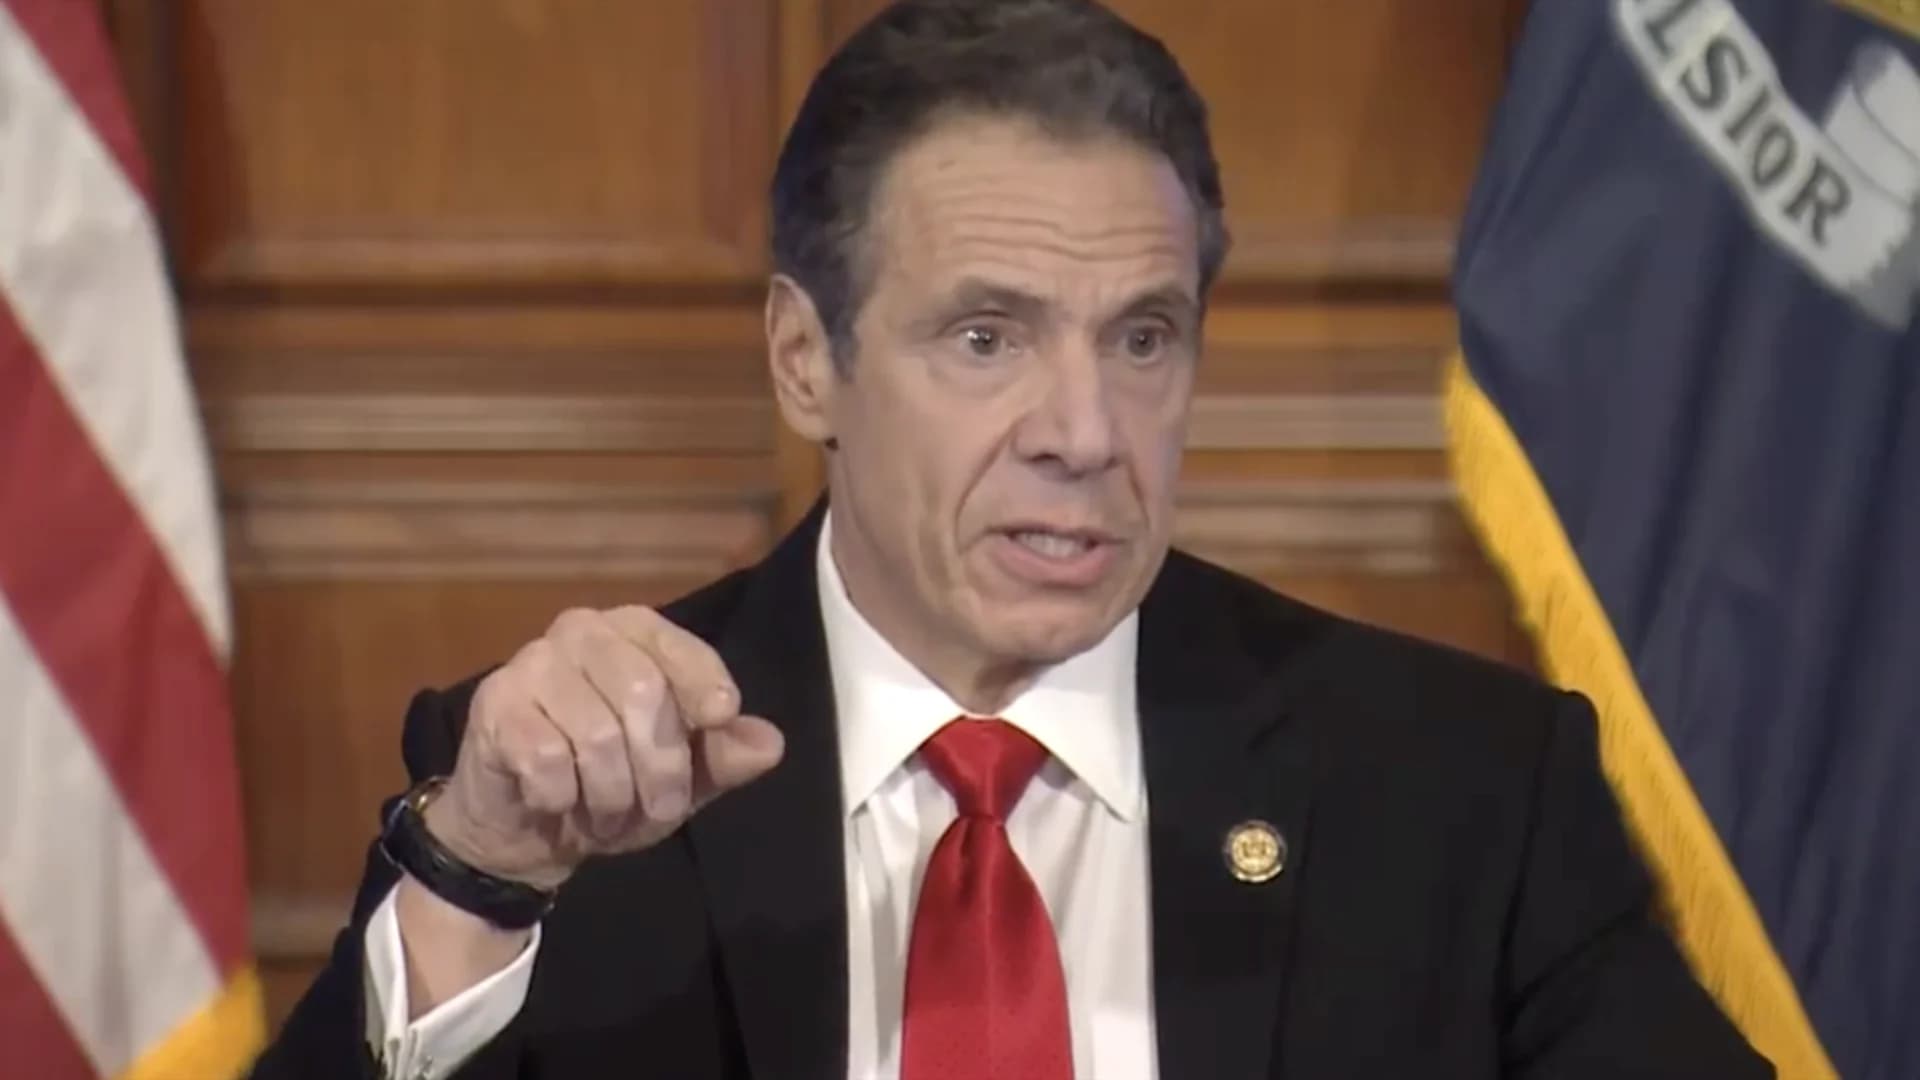 Gov. Cuomo says he will make 'reopening' plan announcement with other governors later today